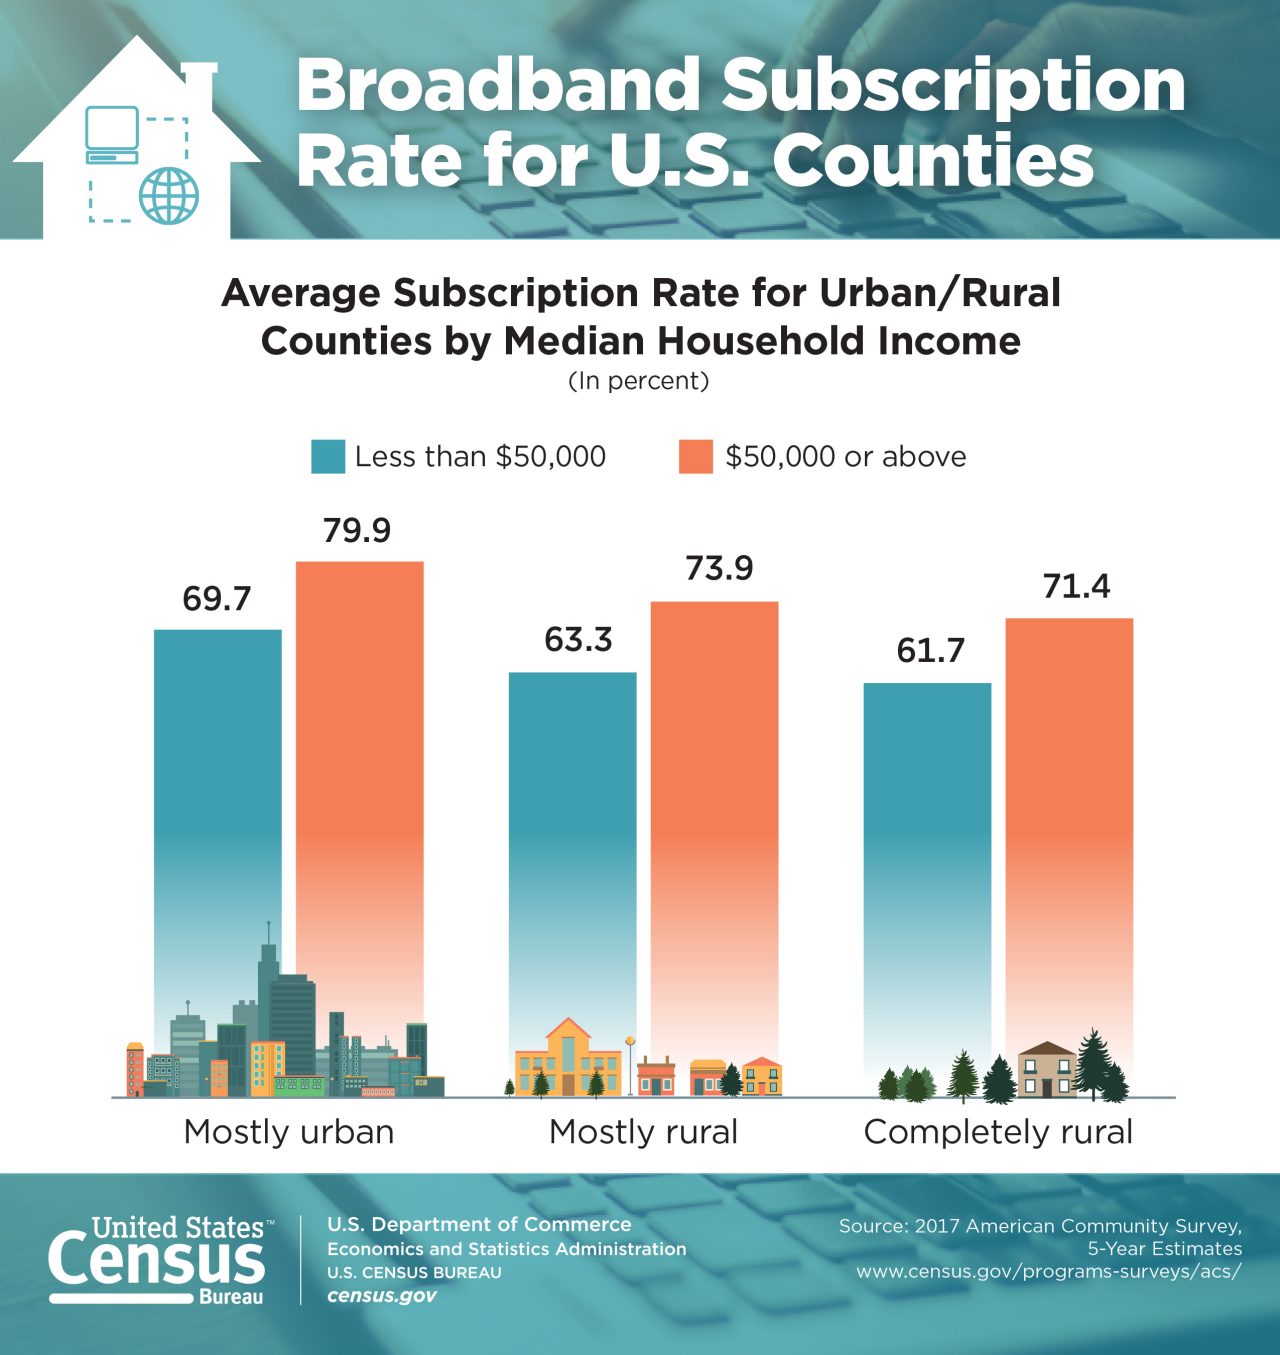 Broadband Subscription Rate for U.S. Counties